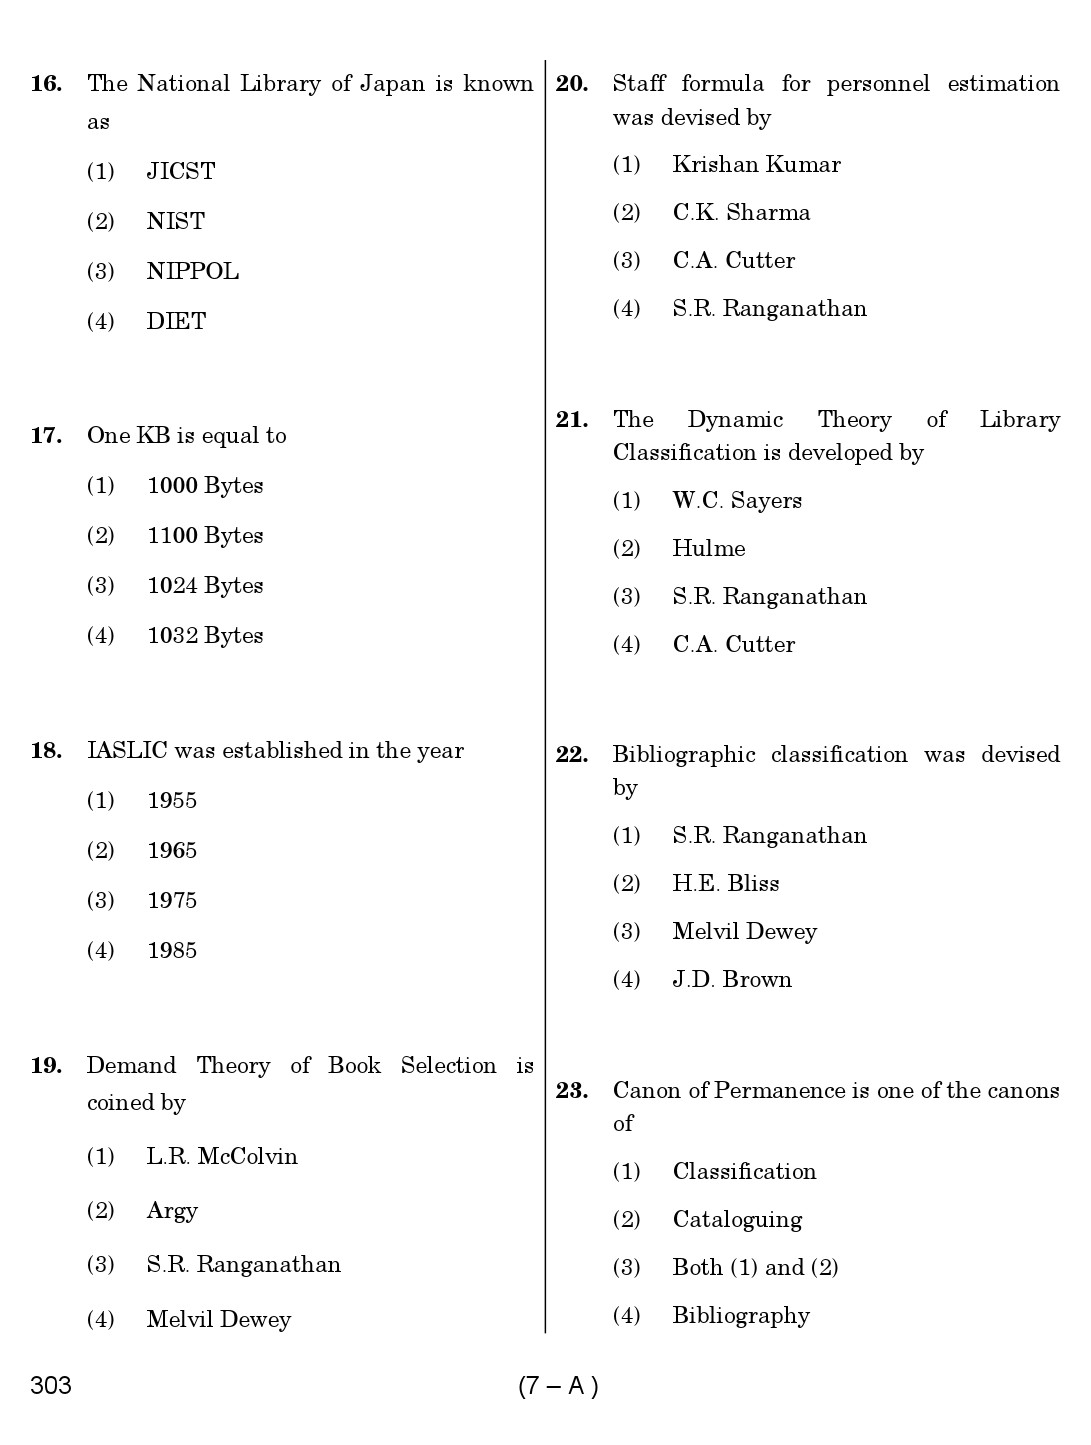 Karnataka PSC 303 Specific Paper II Librarian Exam Sample Question Paper 7